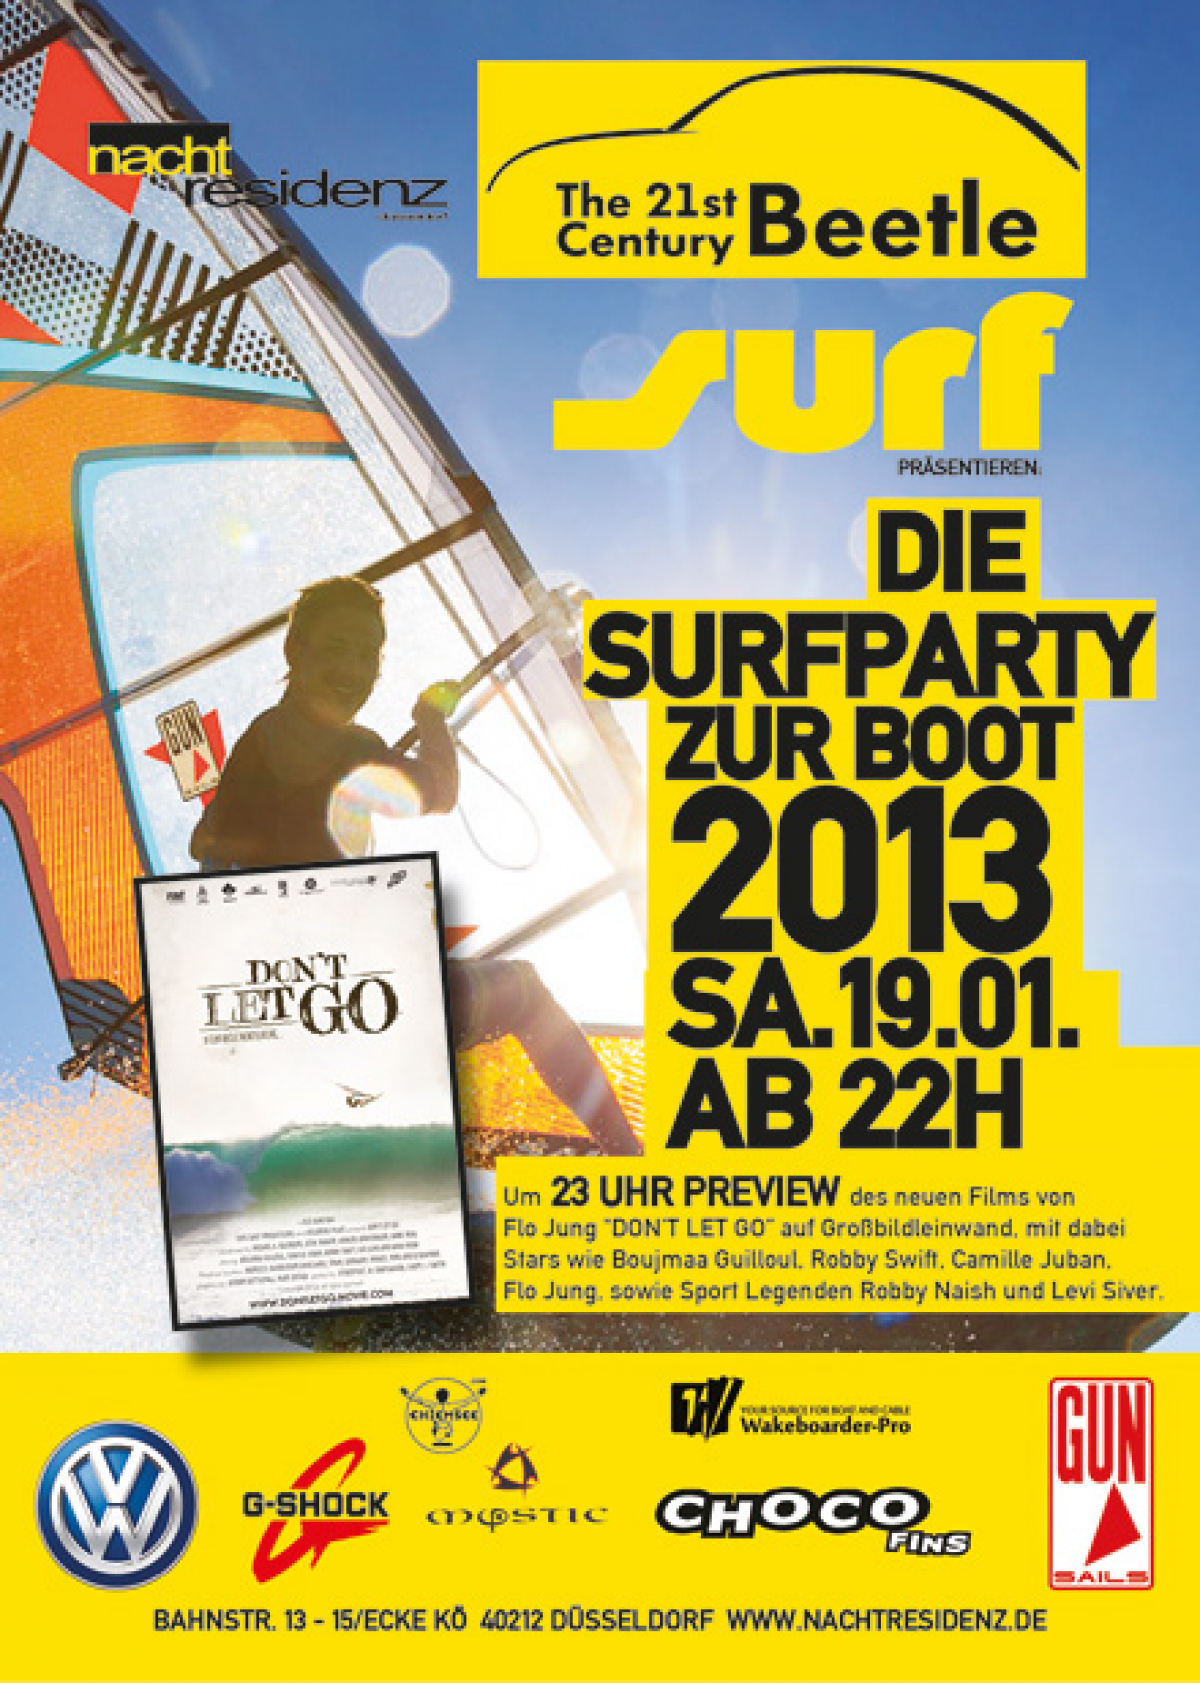 Party mit Prominenz - boot 2013